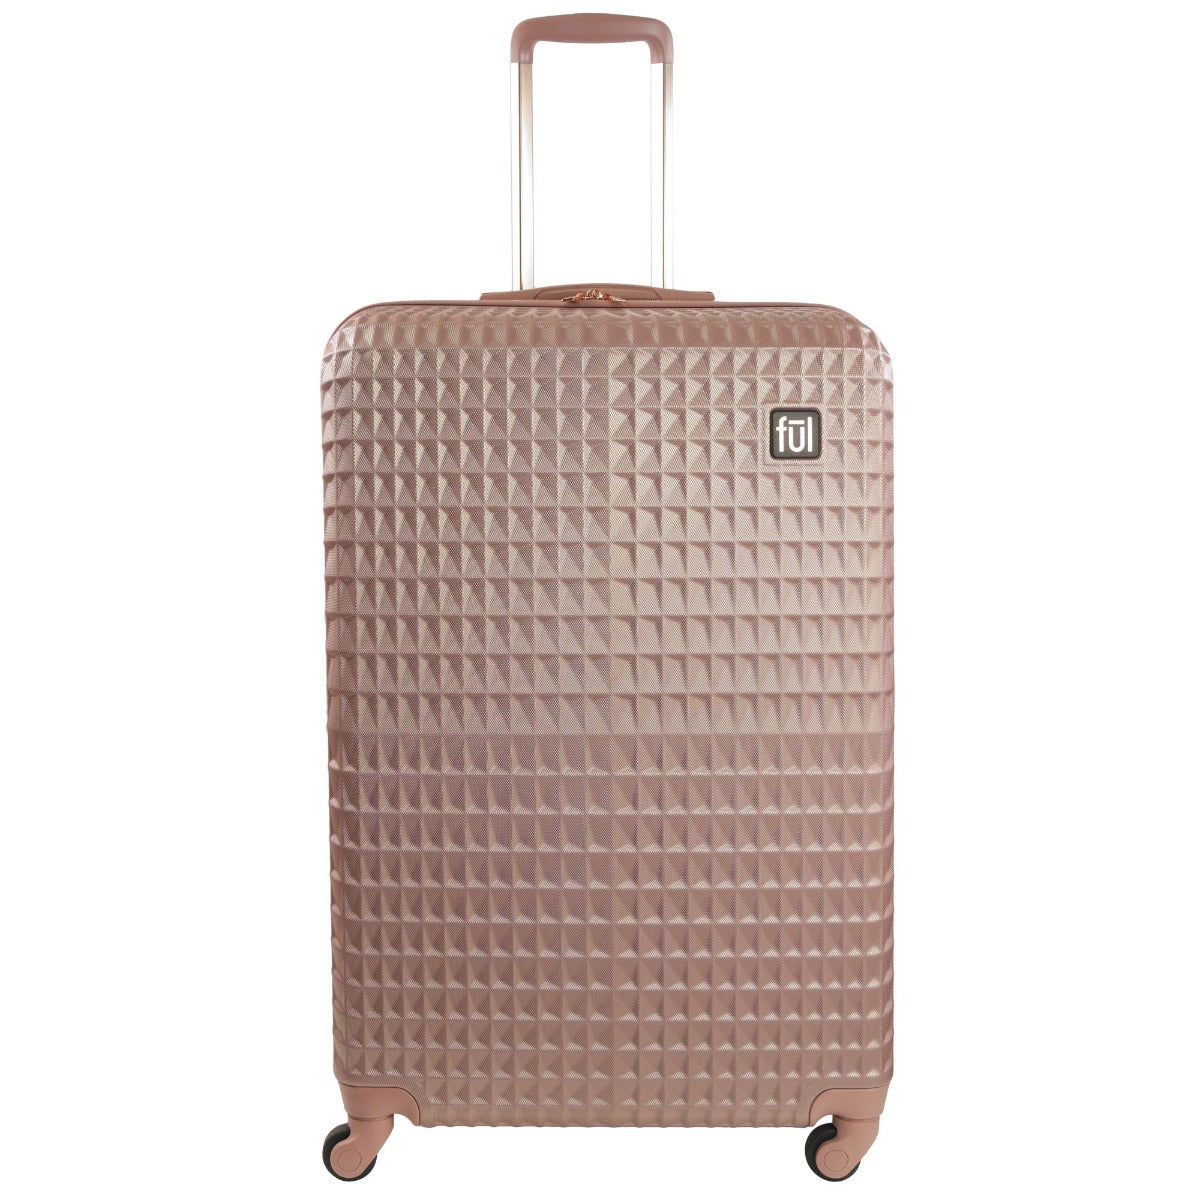 Ful Geo 31-inch check-in hard-sided spinner suitcase